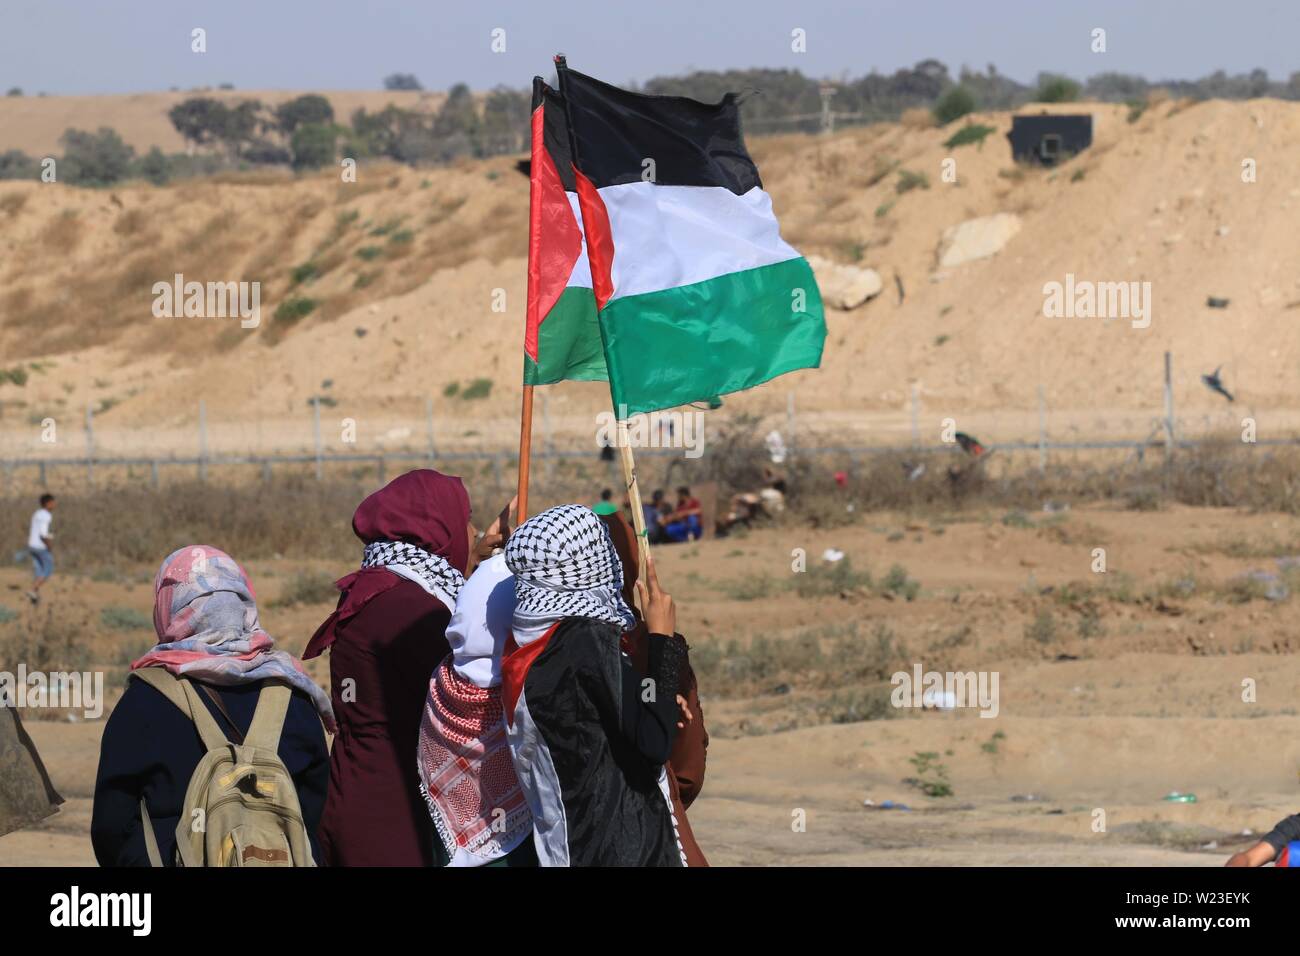 Al-Buraj Refugee Camp, The Gaza Strip, Palestine. 5th July, 2019. Palestinians during clashes with Israeli troops eastern of al-Buraj refugee camp in central of the Gaza Strip. Credit: Mahmoud Khattab/Quds Net News/ZUMA Wire/Alamy Live News Stock Photo